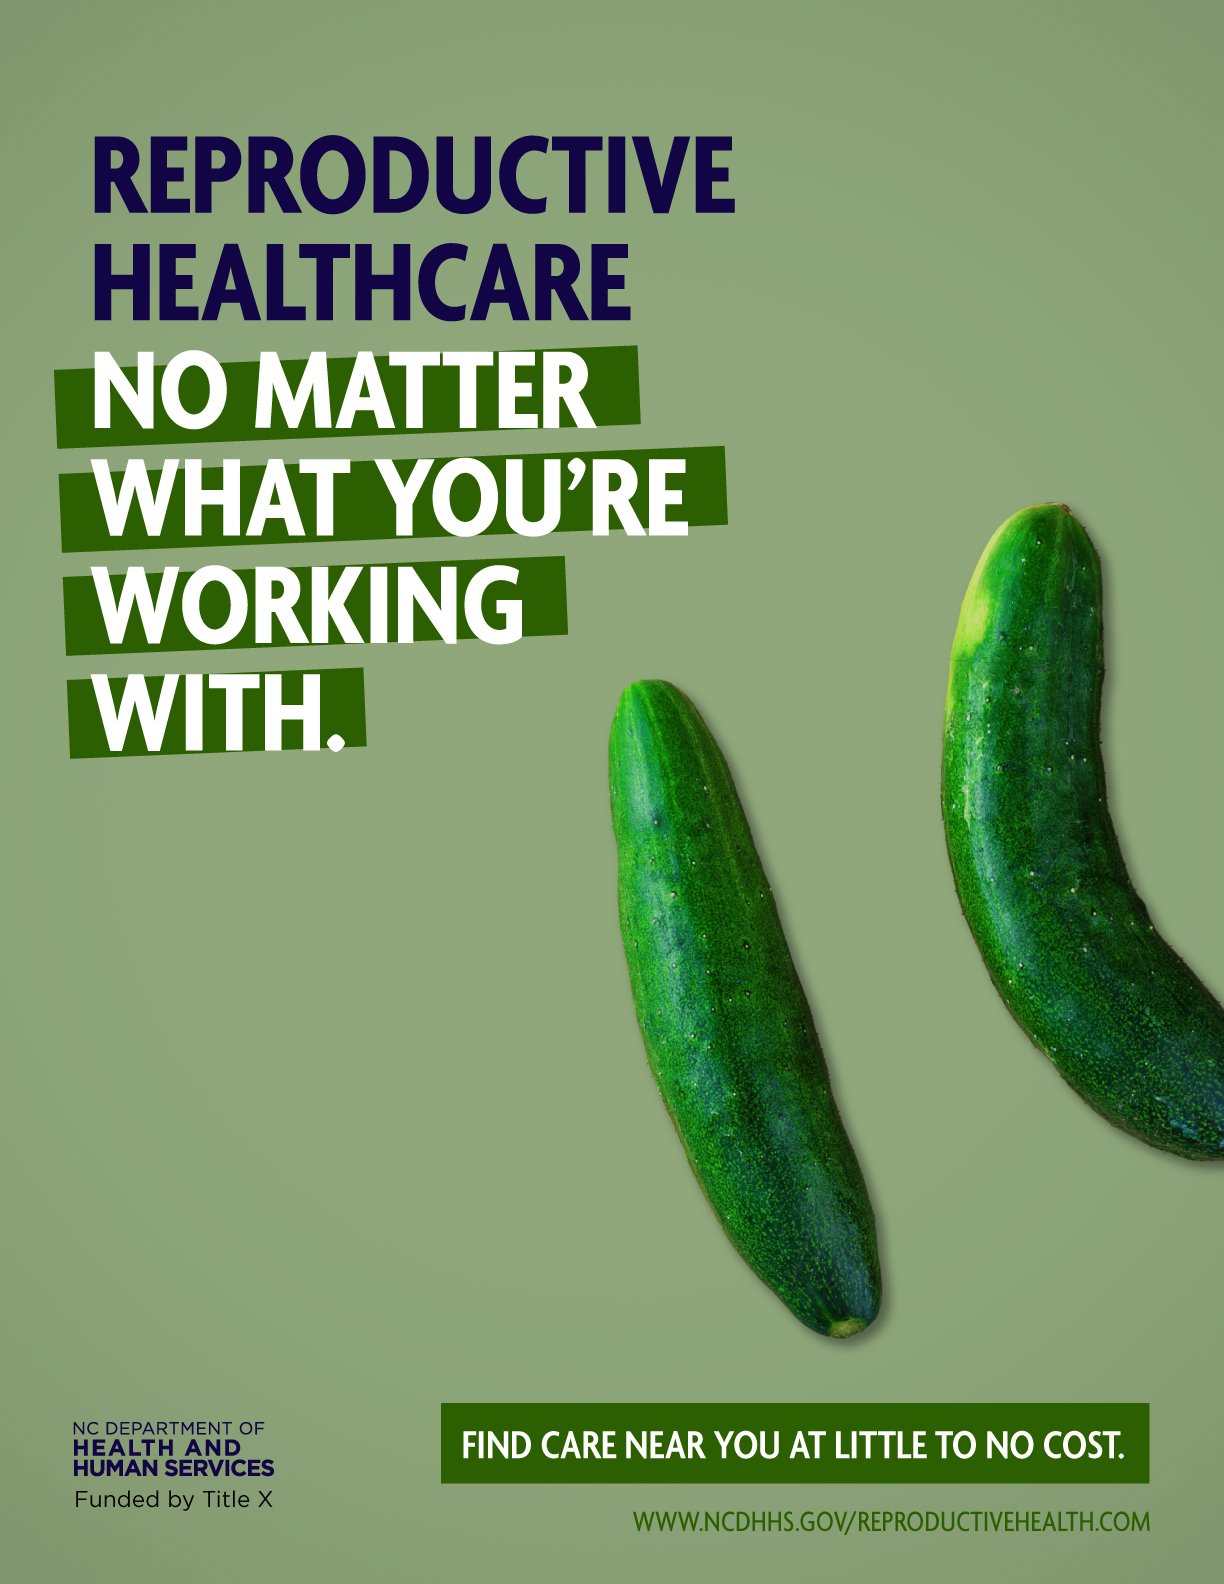 DHHS-3733_ReproductiveHealth_IndoorPoster_17x22_Cucumber_L1.jpg